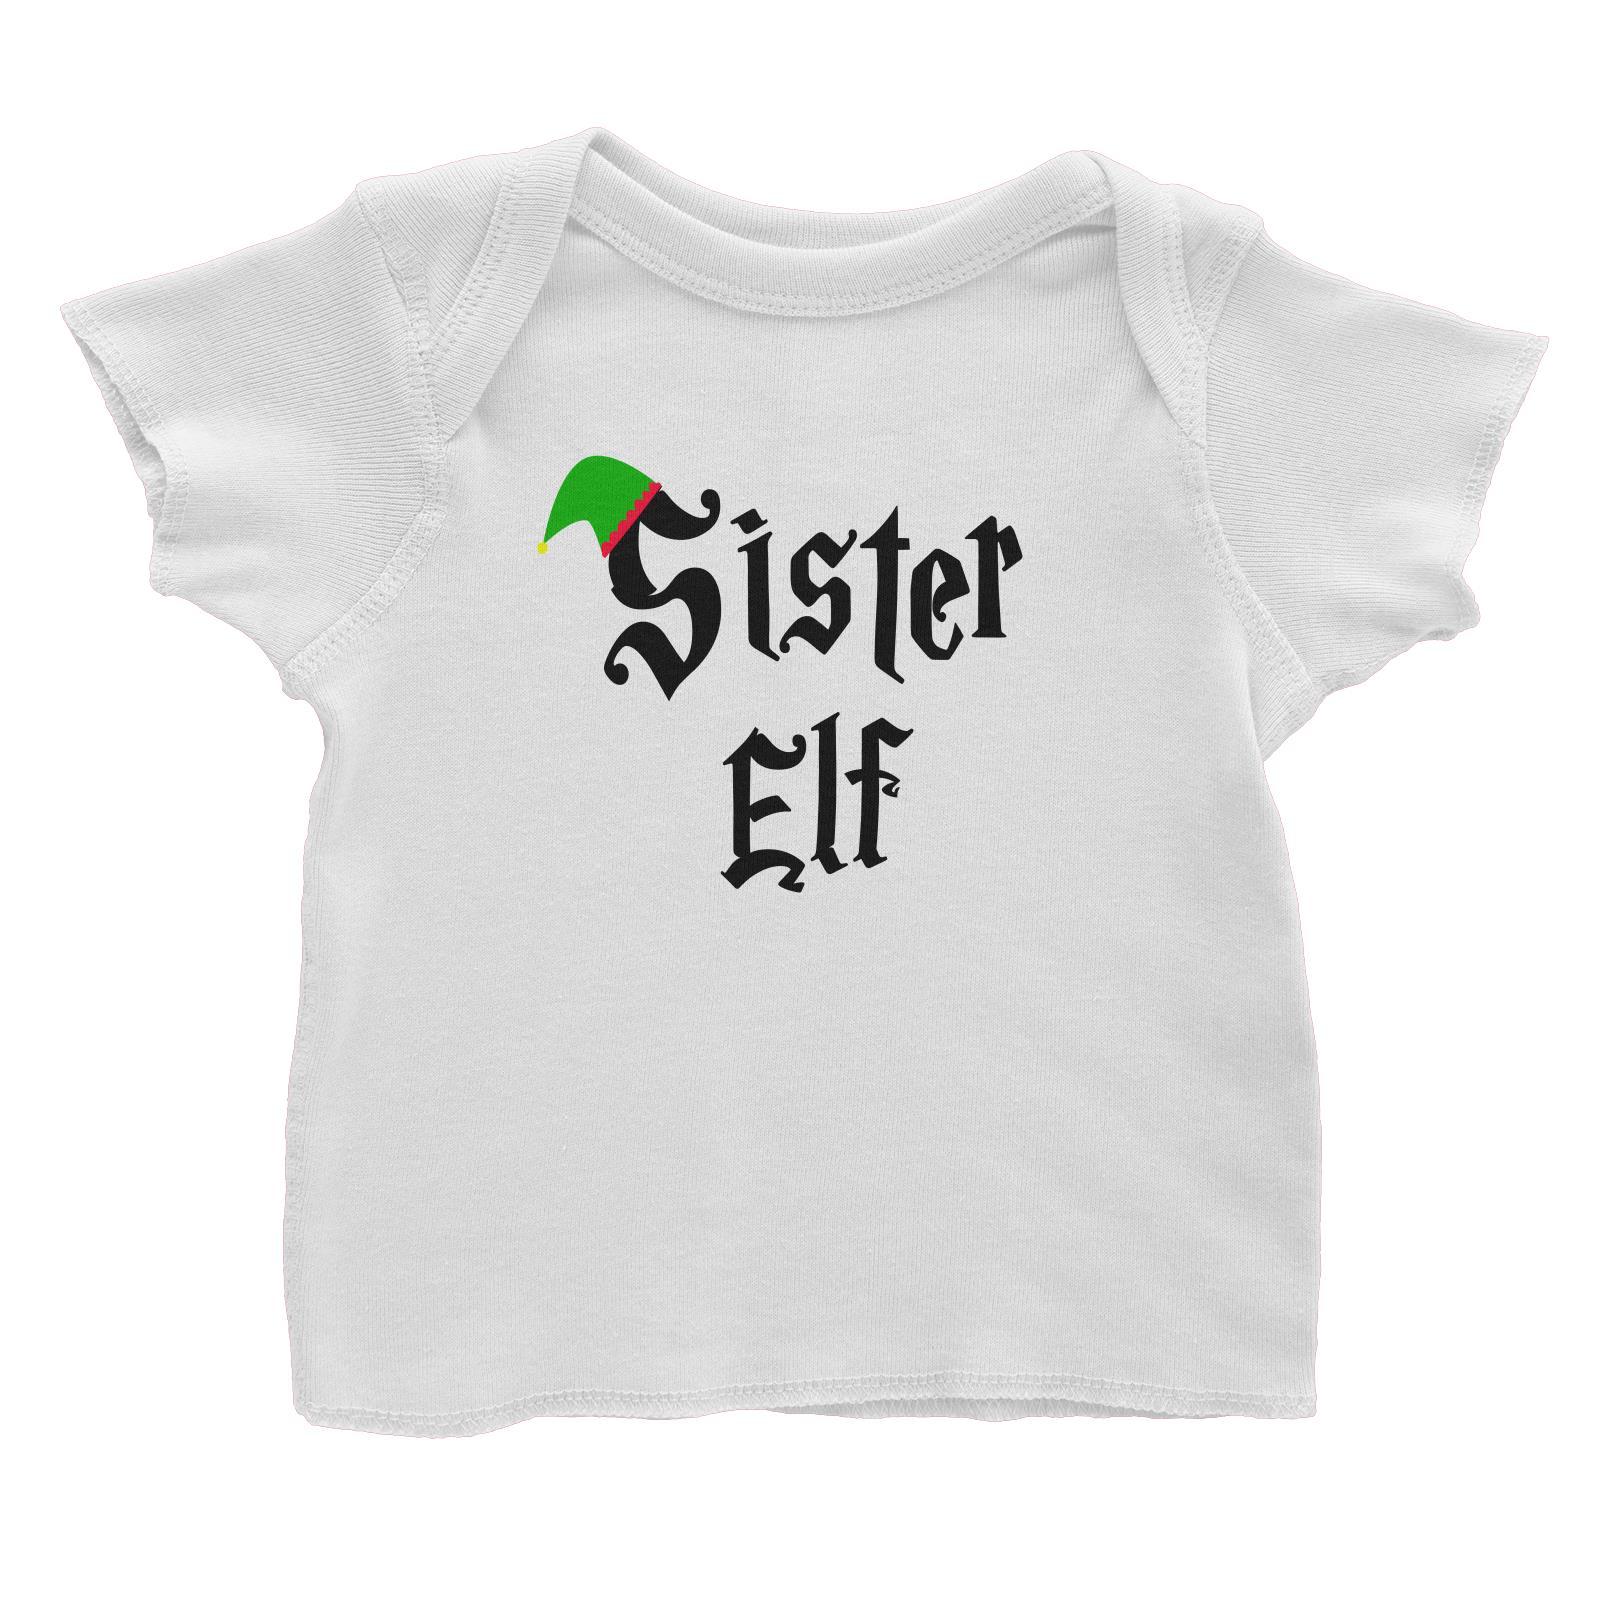 Sister Elf With Hat Baby T-Shirt Christmas Matching Family